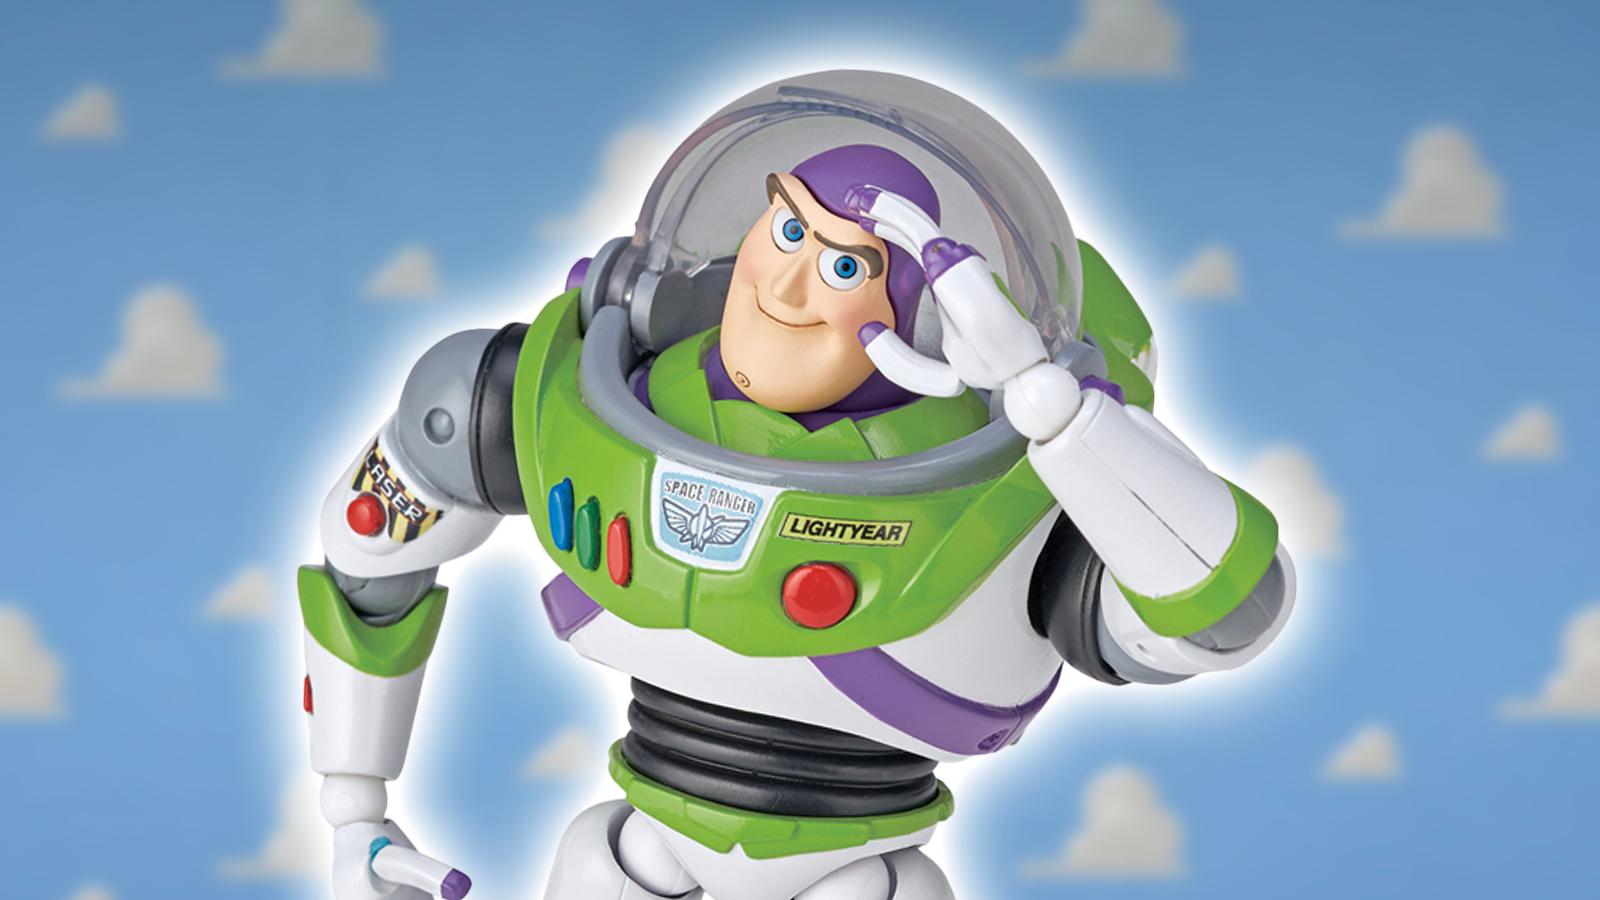 buzz lightyear revoltech figure saluting with a white glow on a background of blue and clouds from andy's room